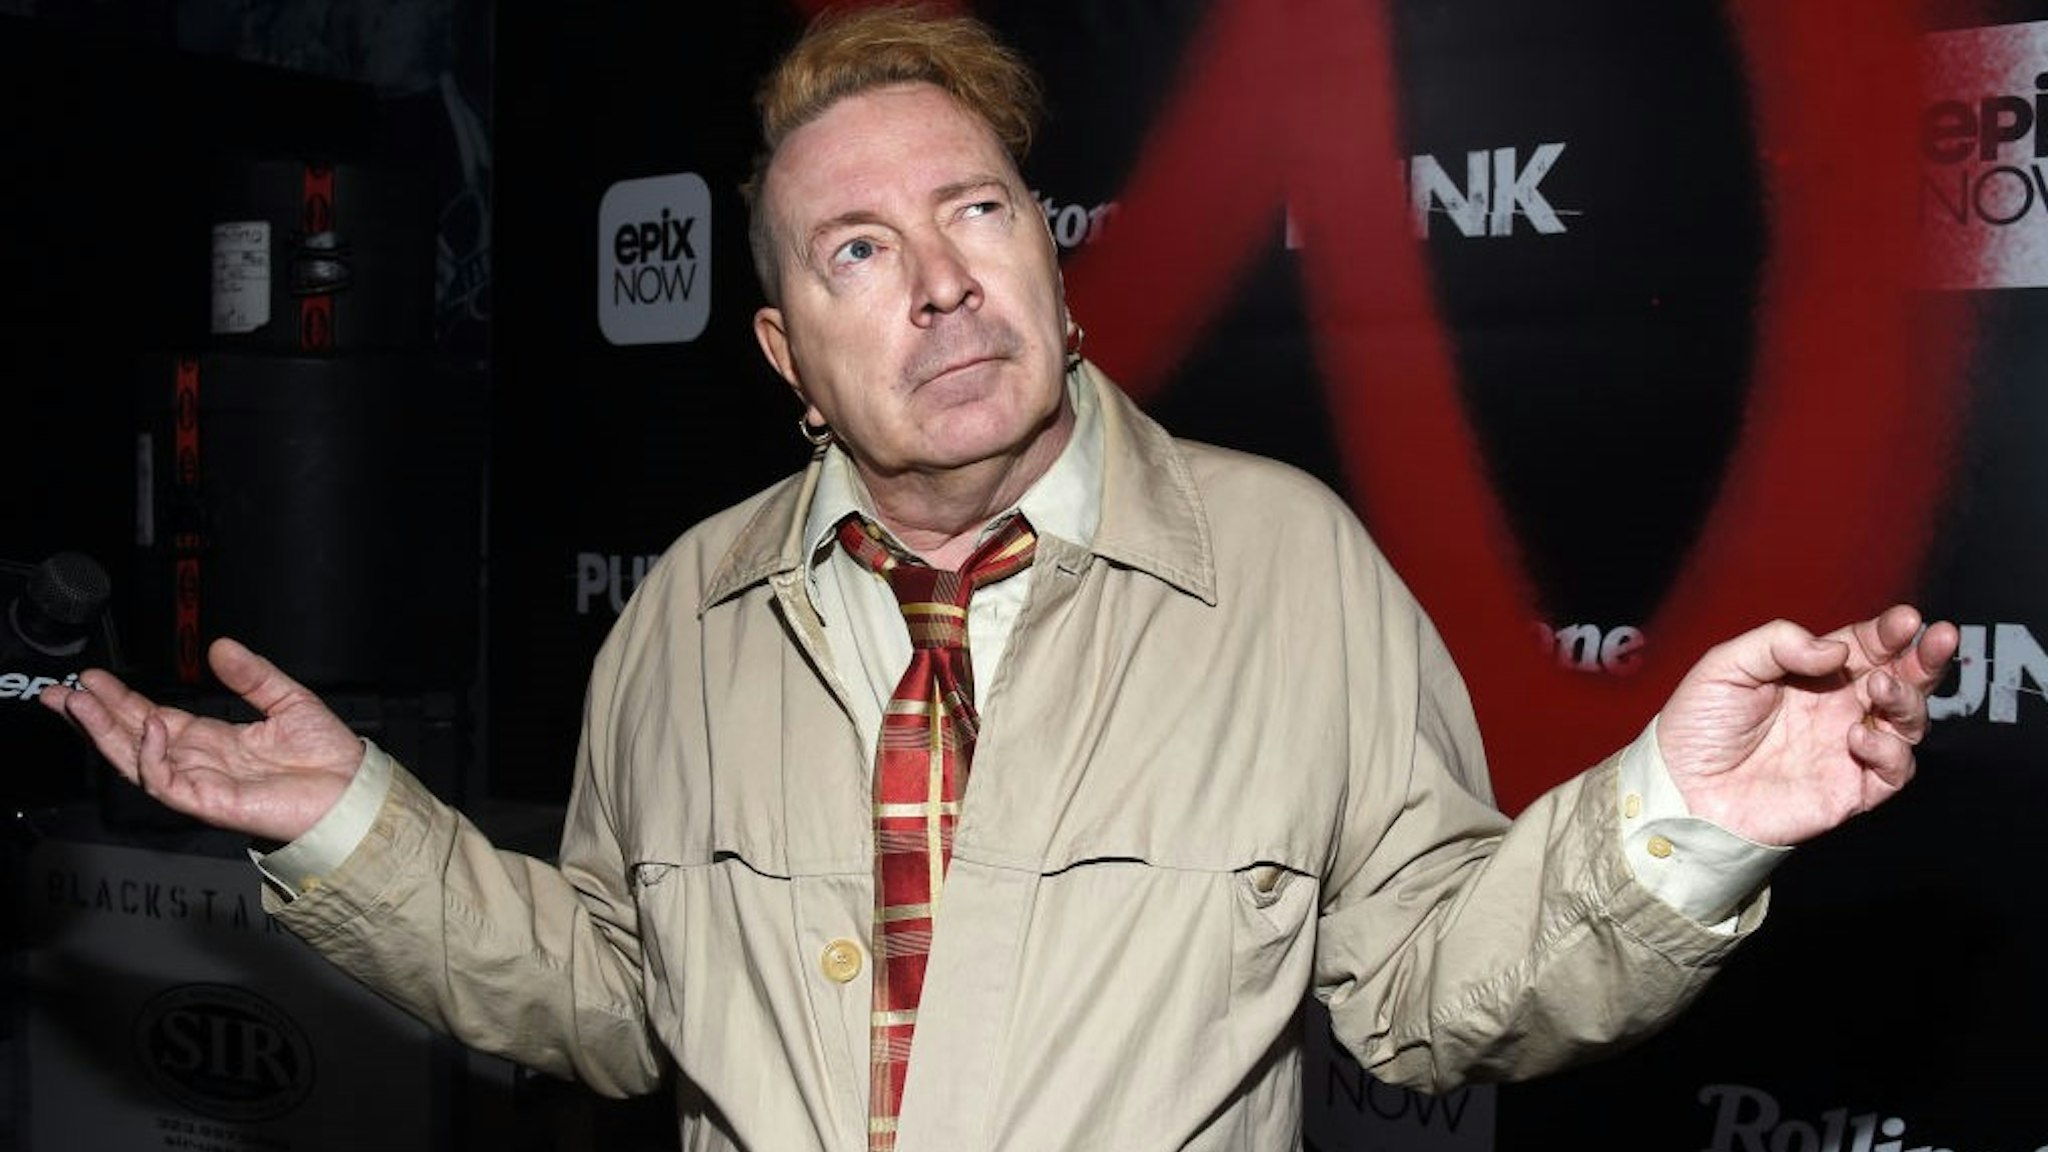 LOS ANGELES, CALIFORNIA - MARCH 04: John Lydon arrives at the premiere of Epix's "Punk" at SIR on March 04, 2019 in Los Angeles, California. (Photo by